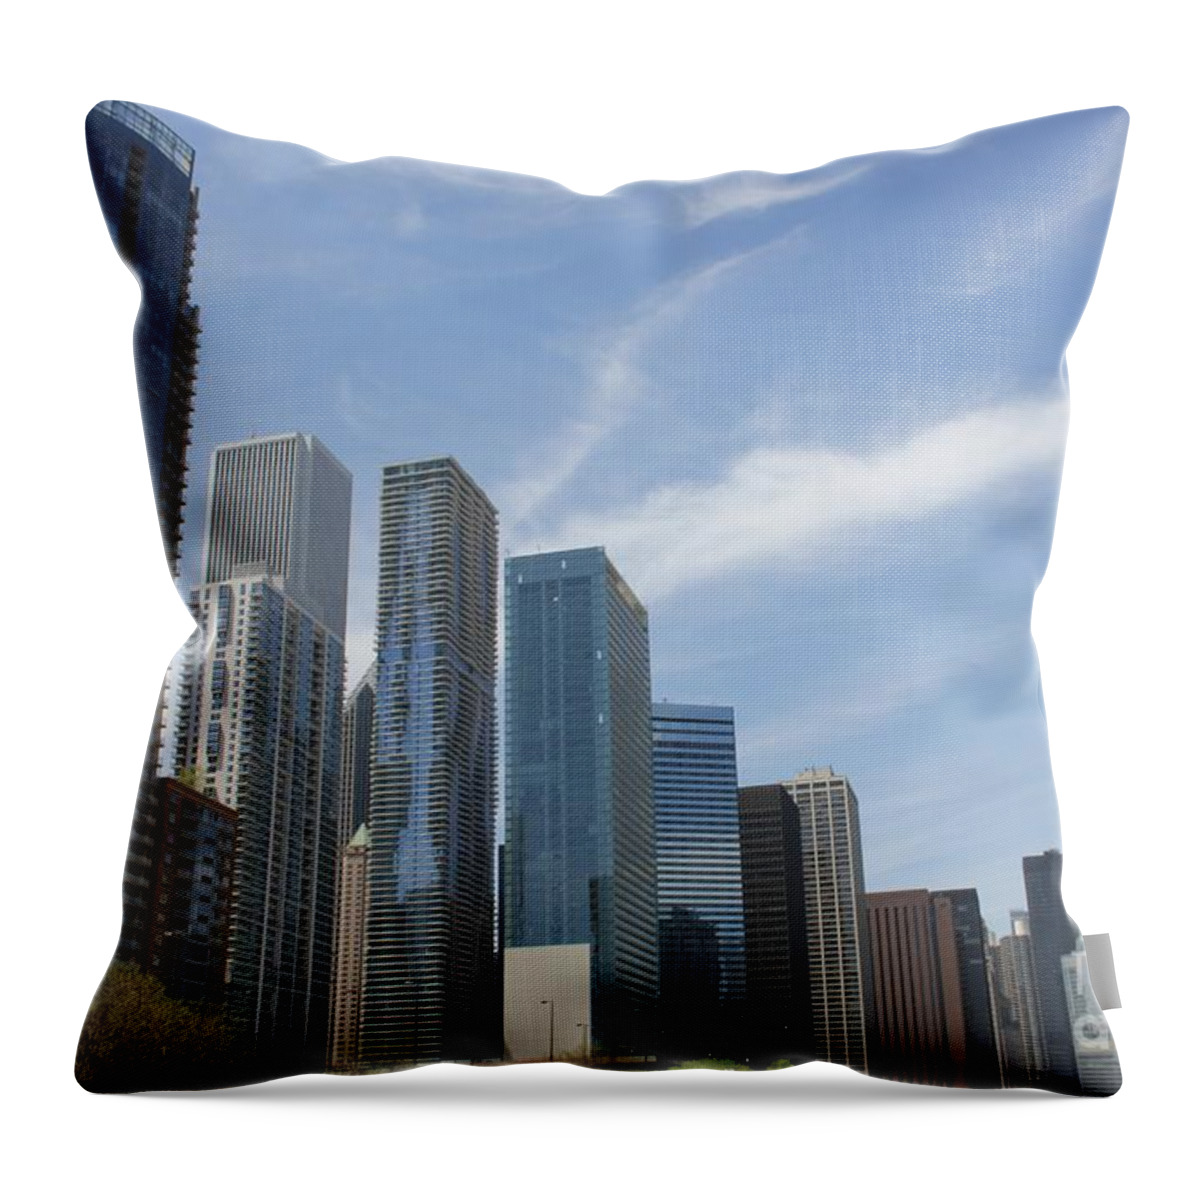 Chicago Throw Pillow featuring the photograph Chicago Skyscrapers by Alice Terrill